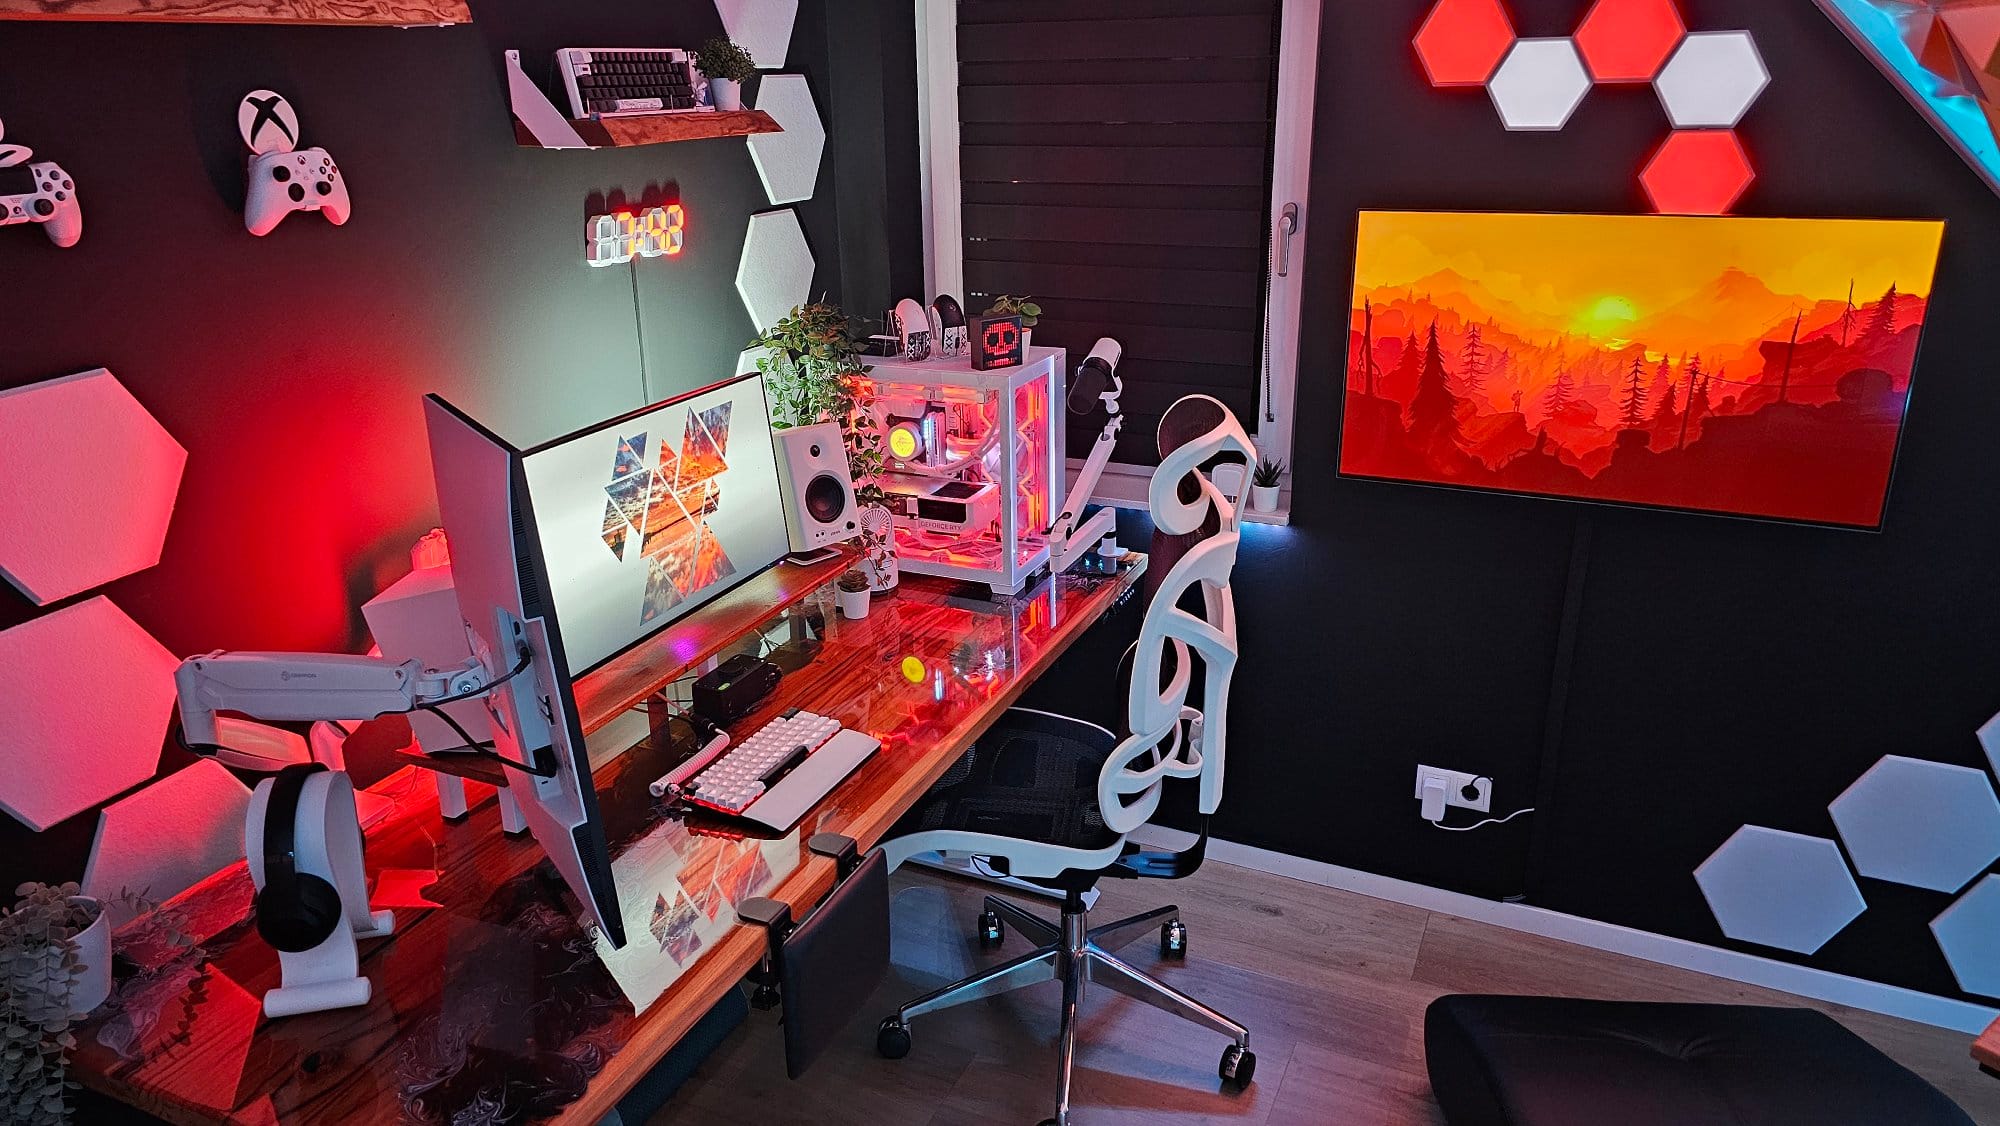 A gaming and workstation setup with a dual-monitor display, a white ergonomic chair, a custom PC with lighting, floating shelves, and decorative wall panels, illuminated by red and blue ambient lights